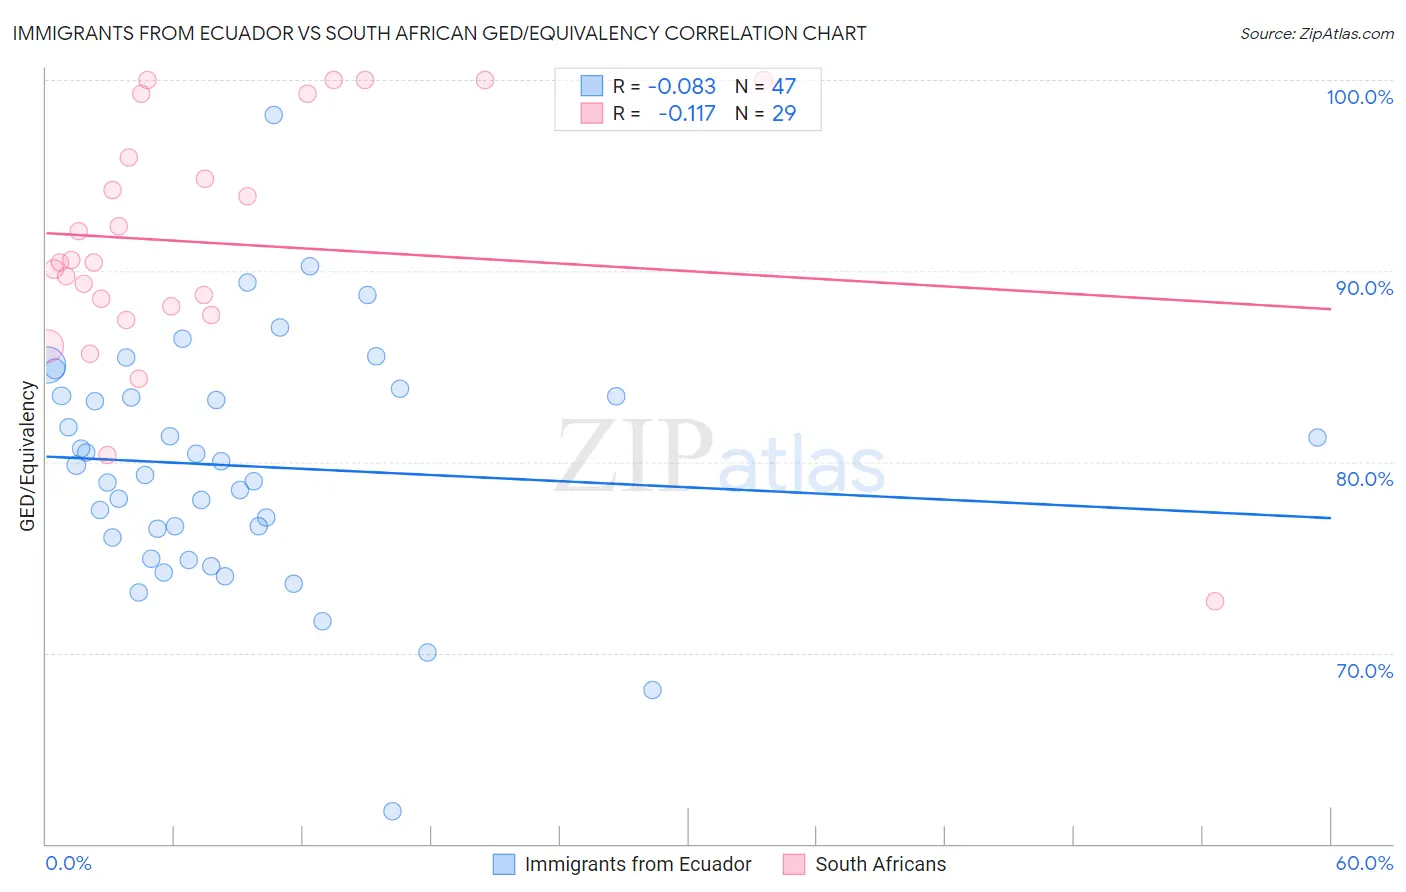 Immigrants from Ecuador vs South African GED/Equivalency